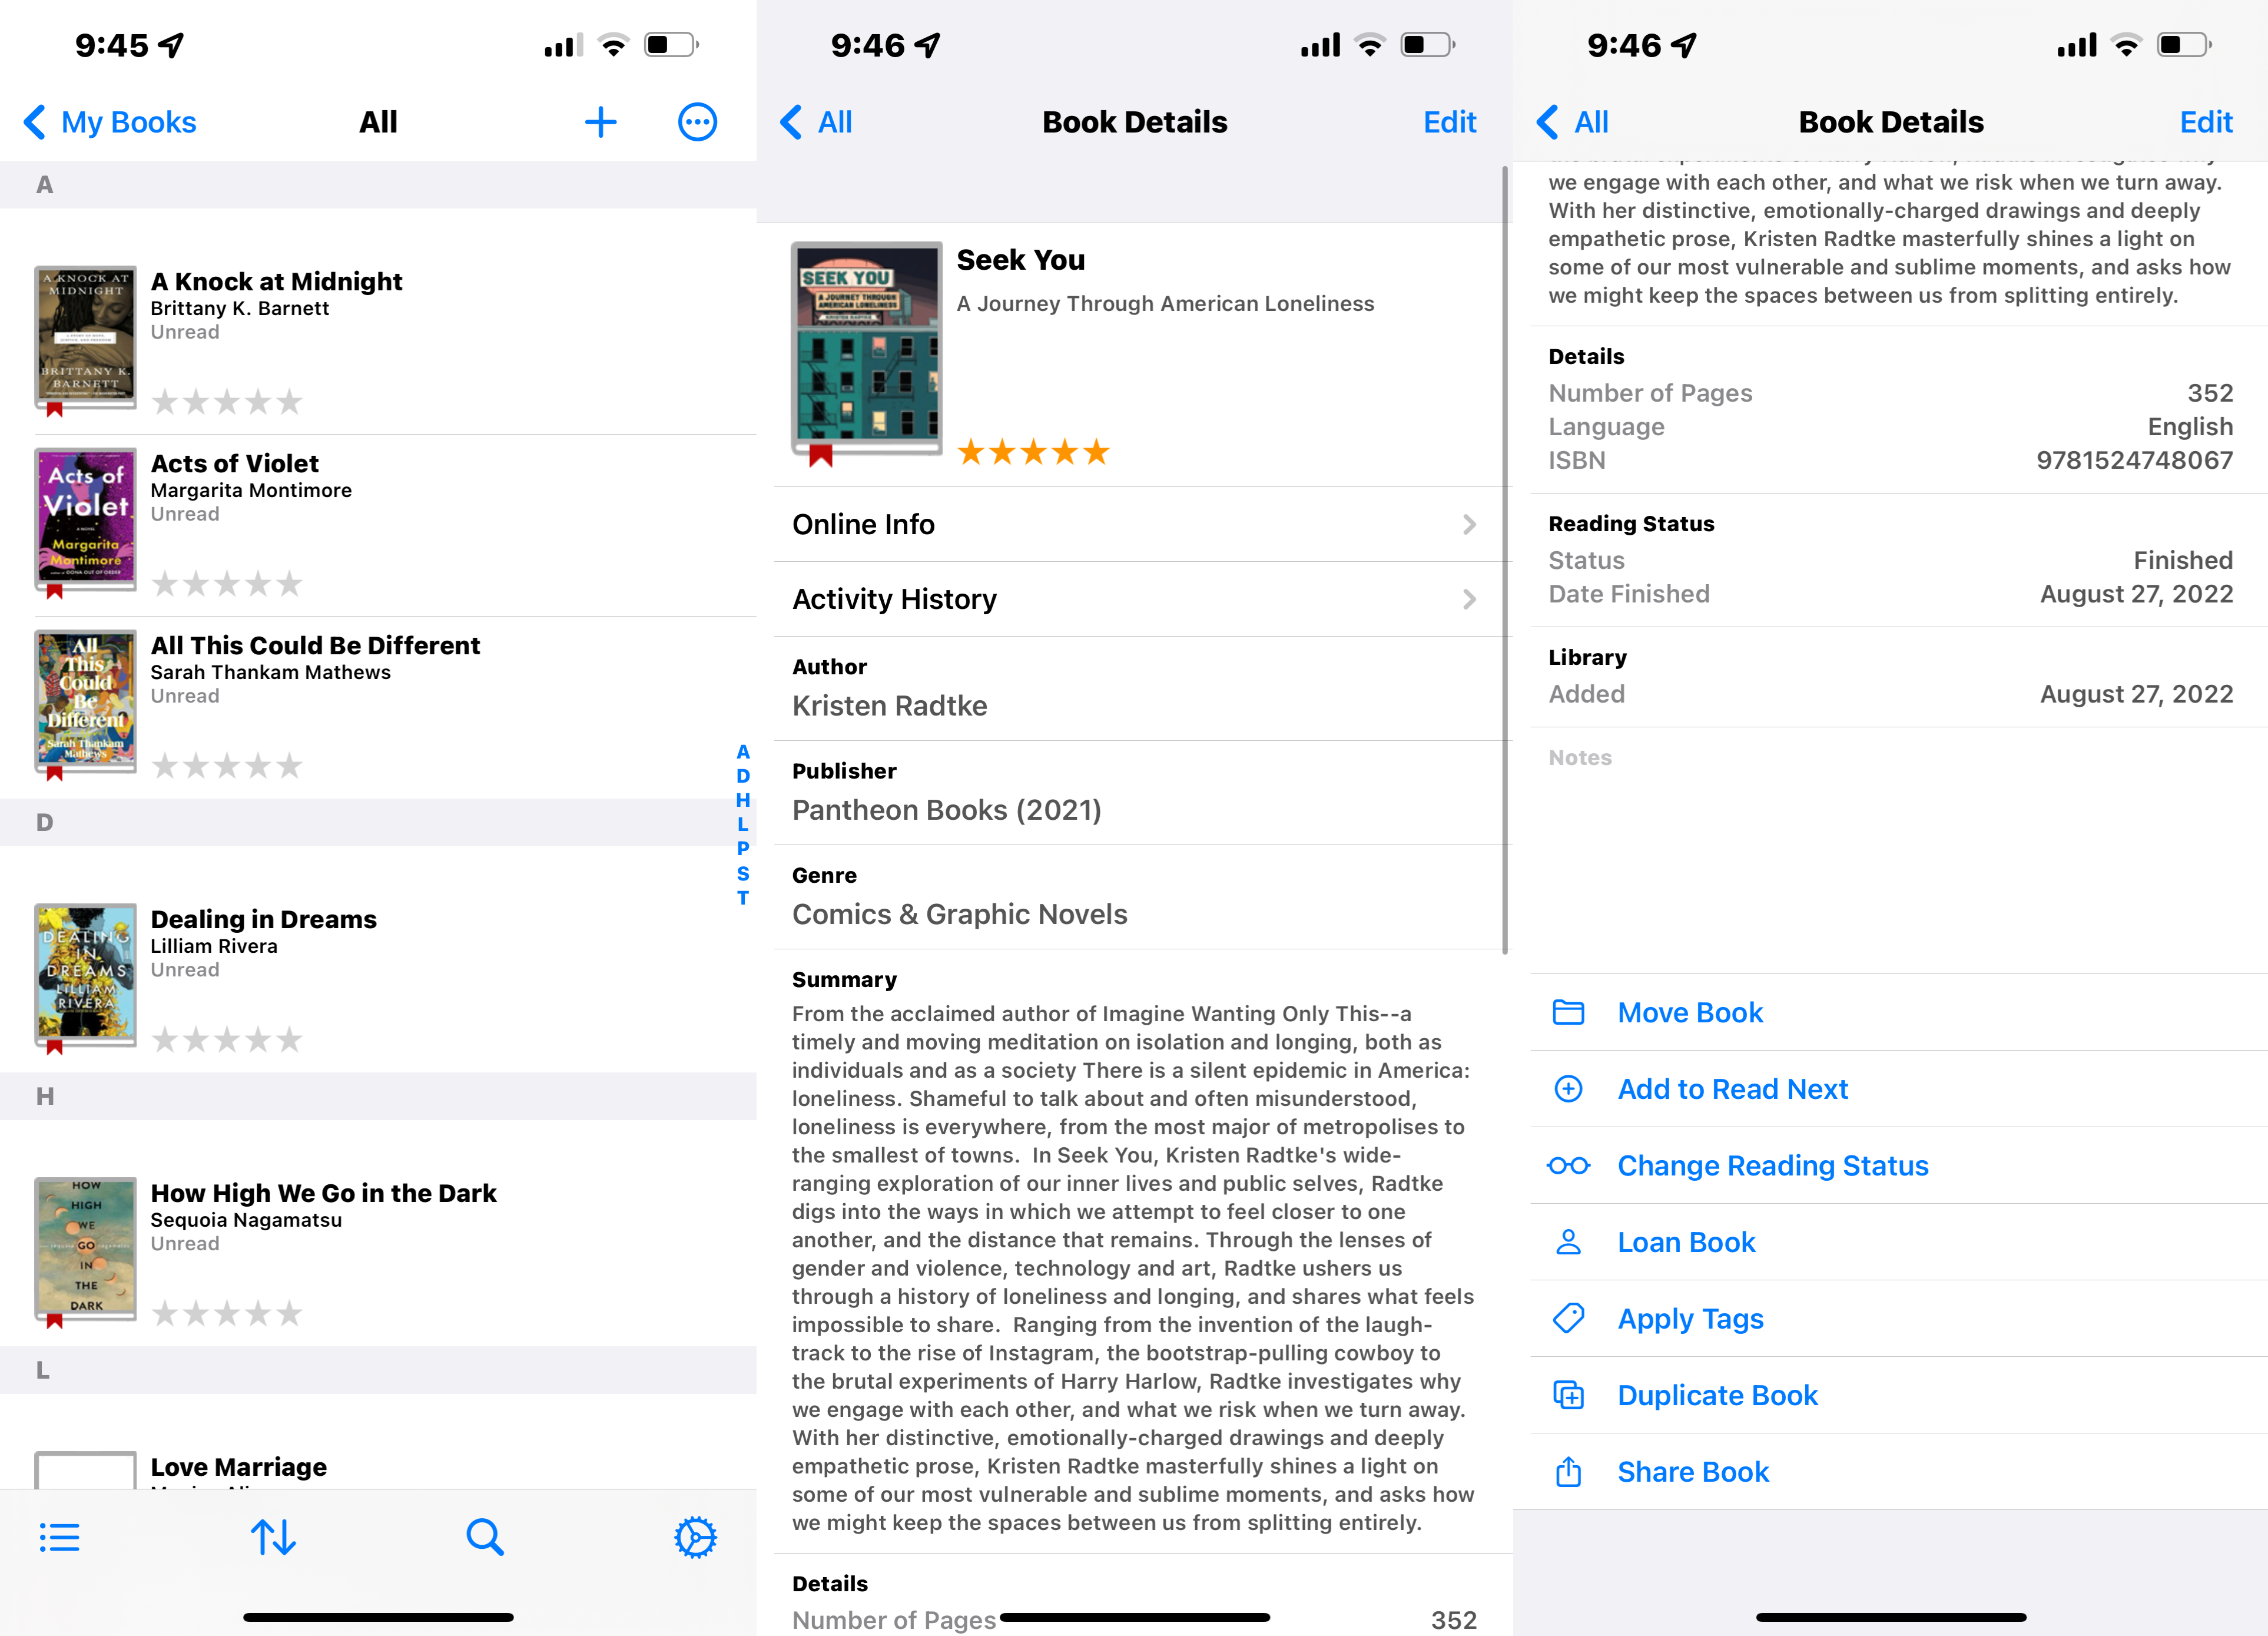 3 screenshots of the Book Buddy app showing the main library list, a book's individual page, and a menu option highlighting move shelf and loan book features. 